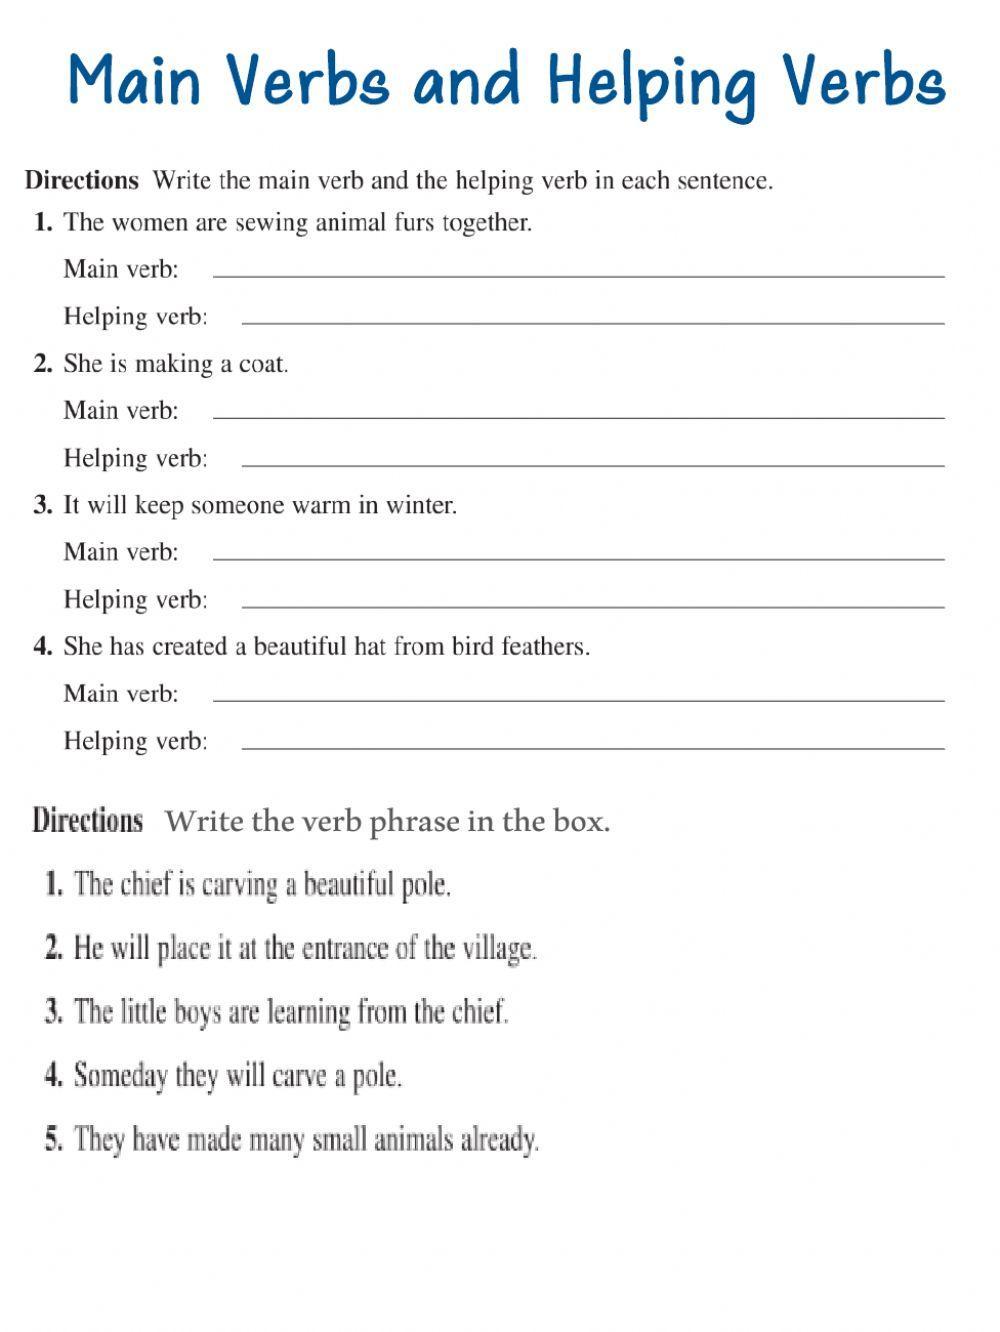 main-and-helping-verbs-exercise-live-worksheets